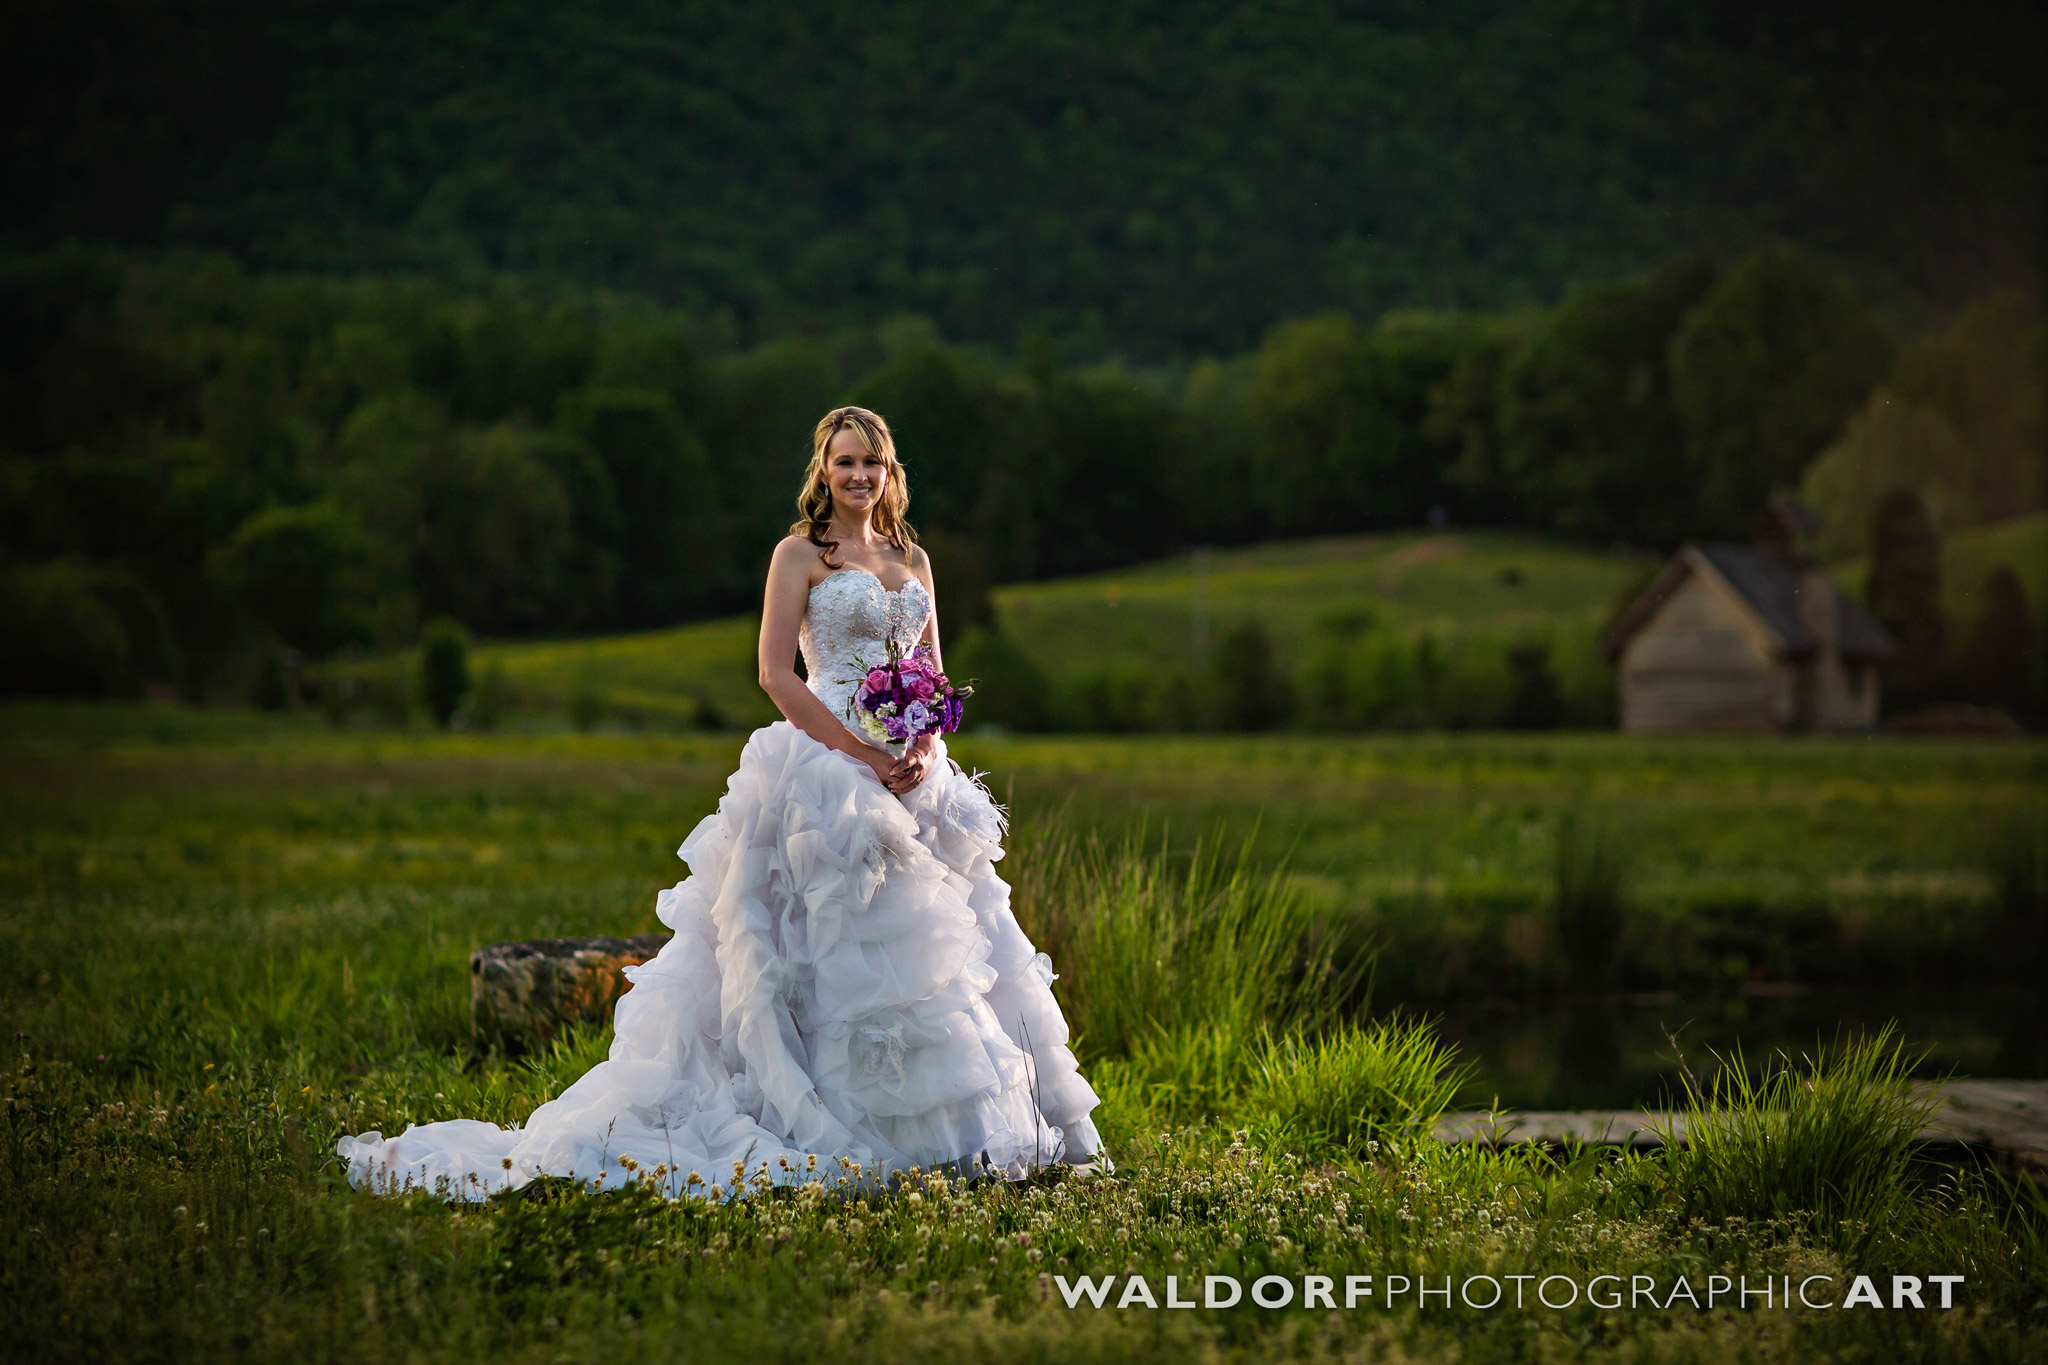 Bridal photo shoot outside the tennessee wedding venue close up